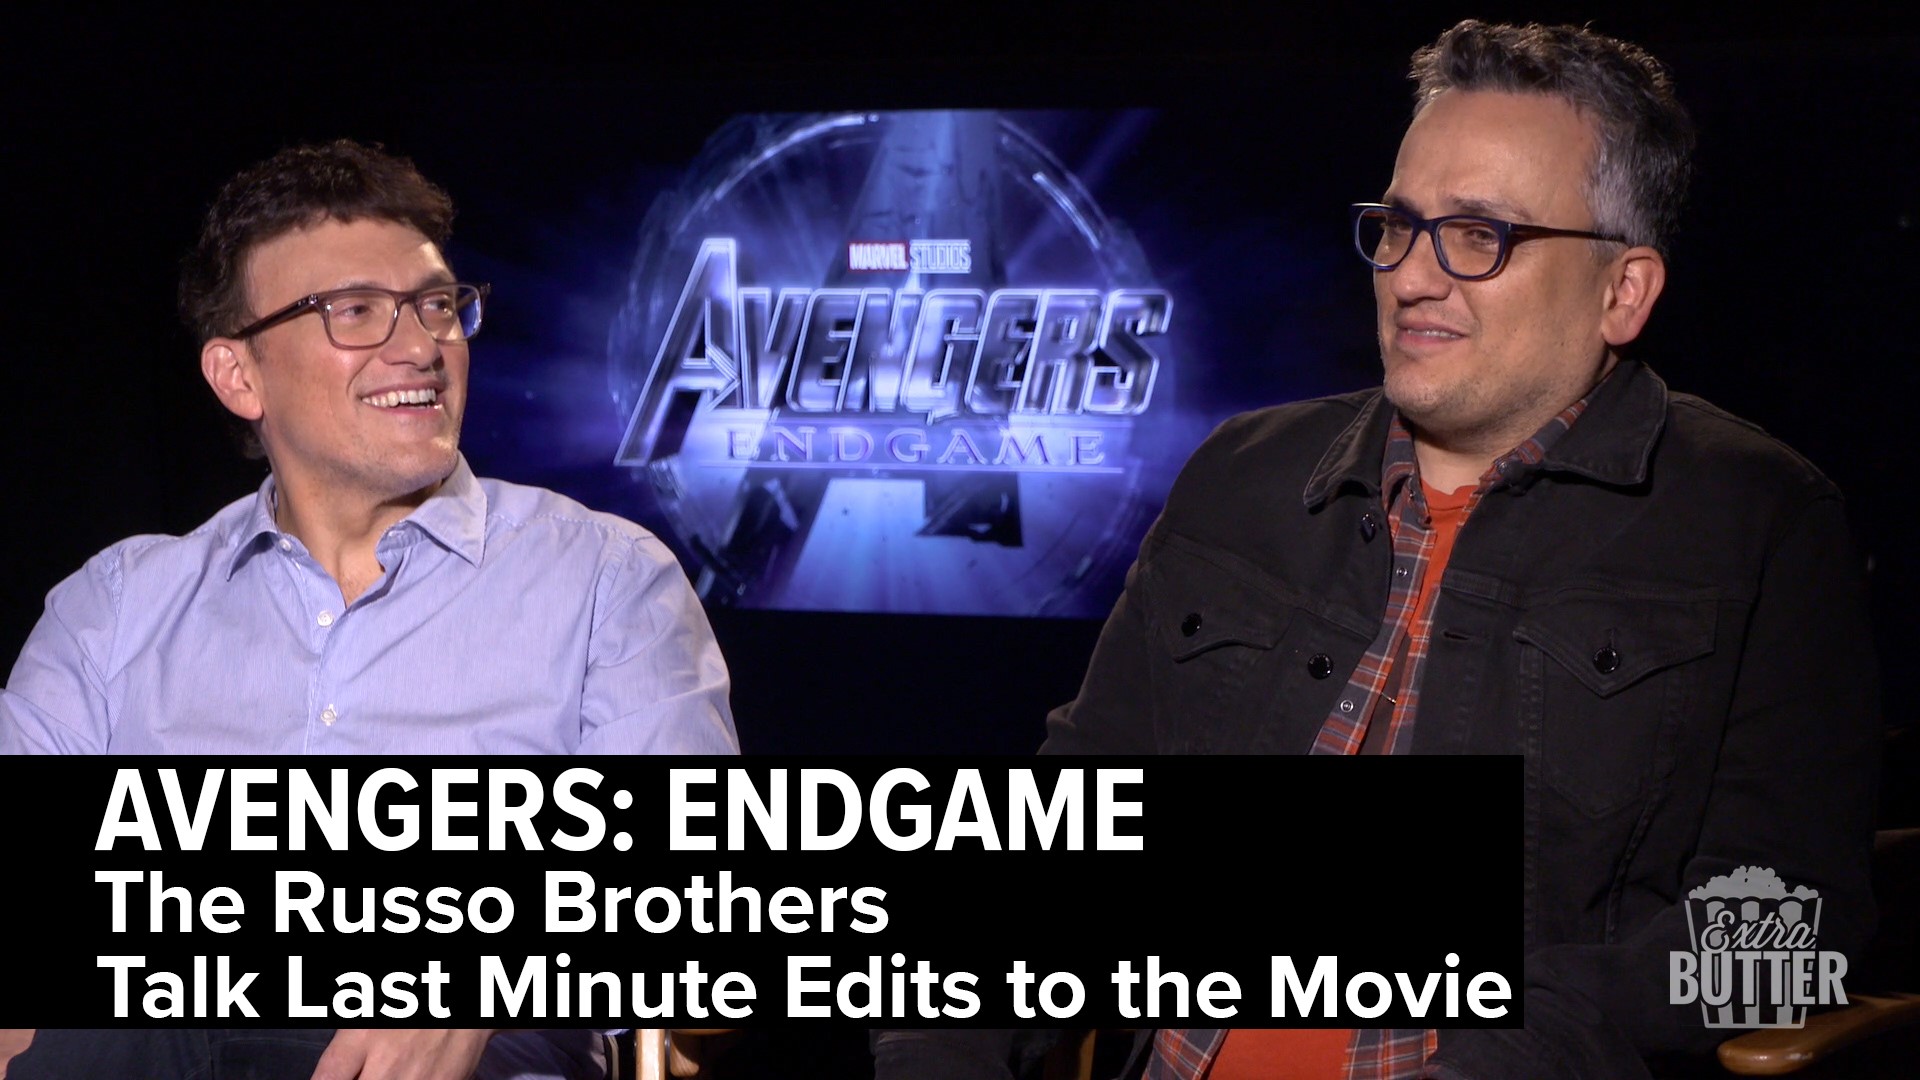 Anthony and Joe Russo sit down to talk about 'Avengers: Endgame' just hours after making the final edit to the movie. Don't worry, they #DontSpoilTheEndgame for fans. The directing pair talk about rushing to finish the movie and working together as brothers. They also tell Mark S. Allen about their next project with Tom Holland, who they just directed as Spider-Man. Interview arranged by Walt Disney Studios Motion Pictures.